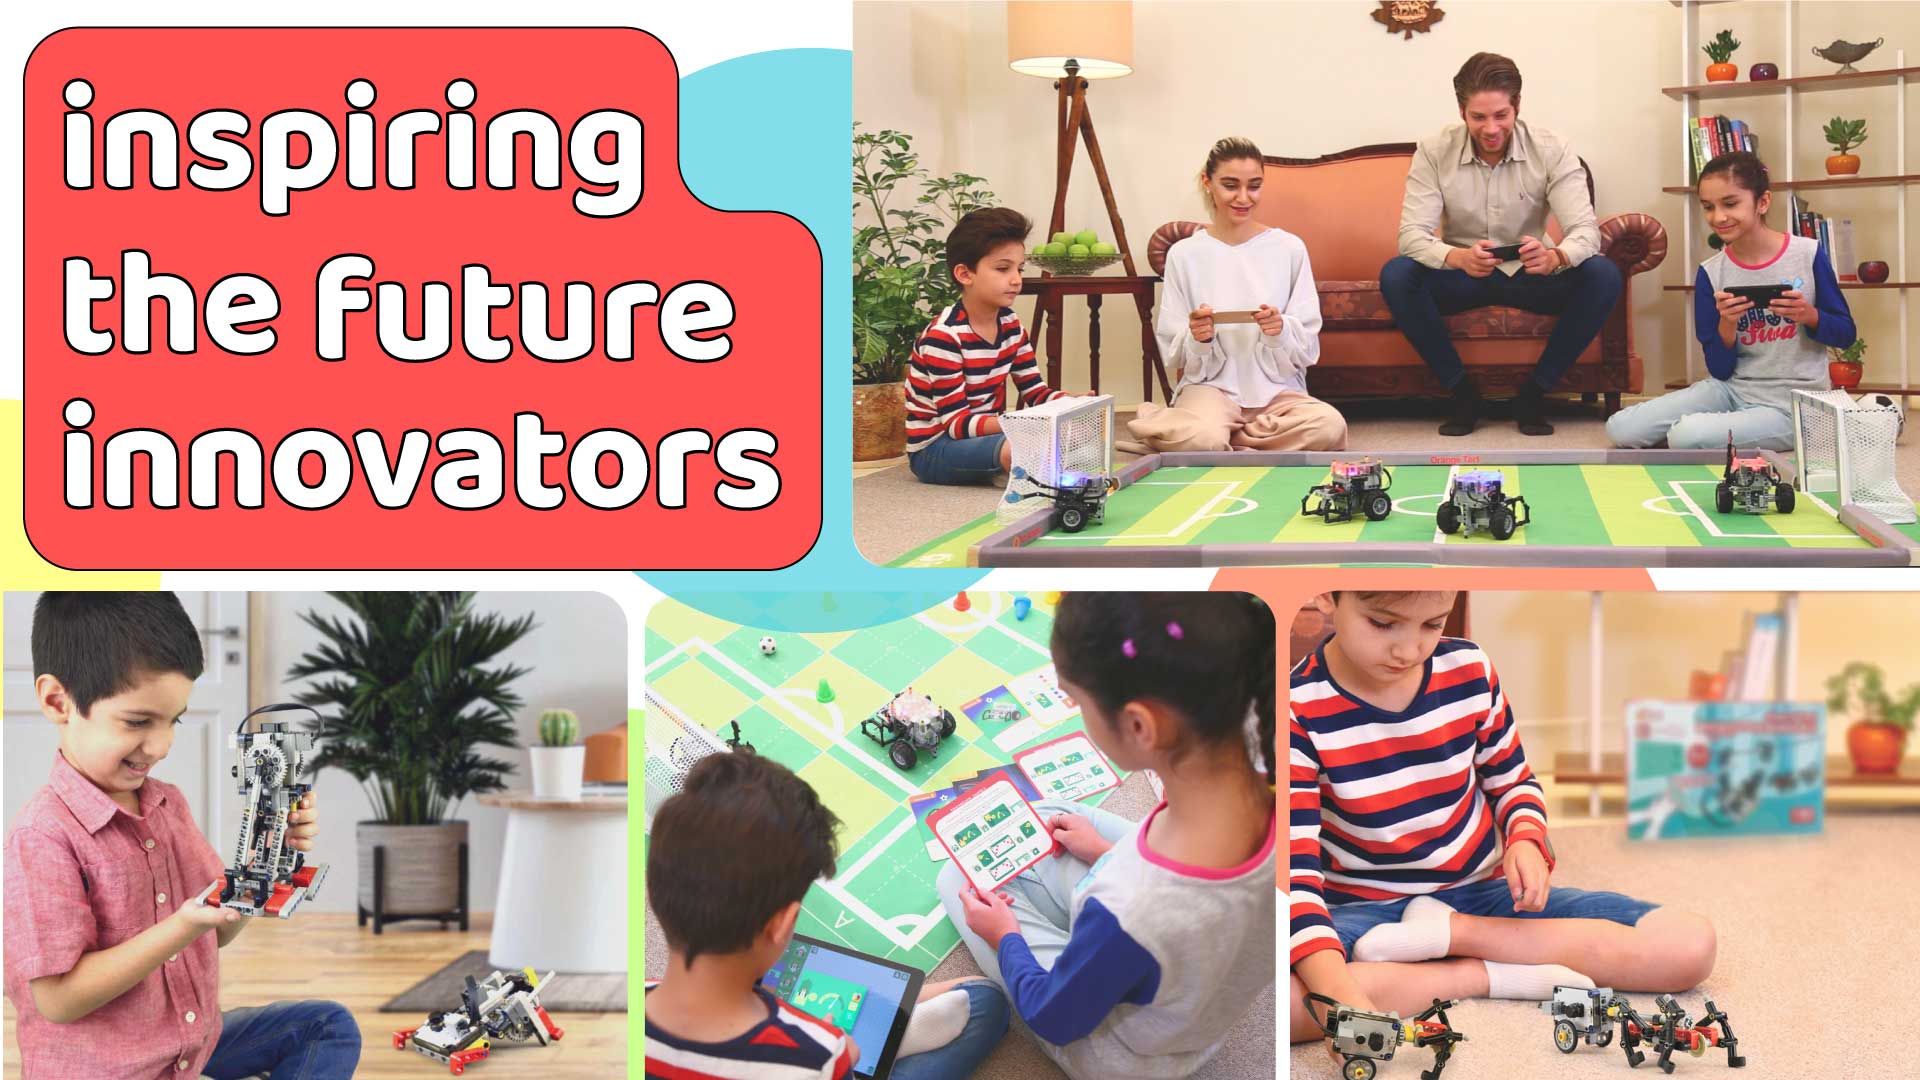 Educational Robots & Tech Toys for STEAM Education